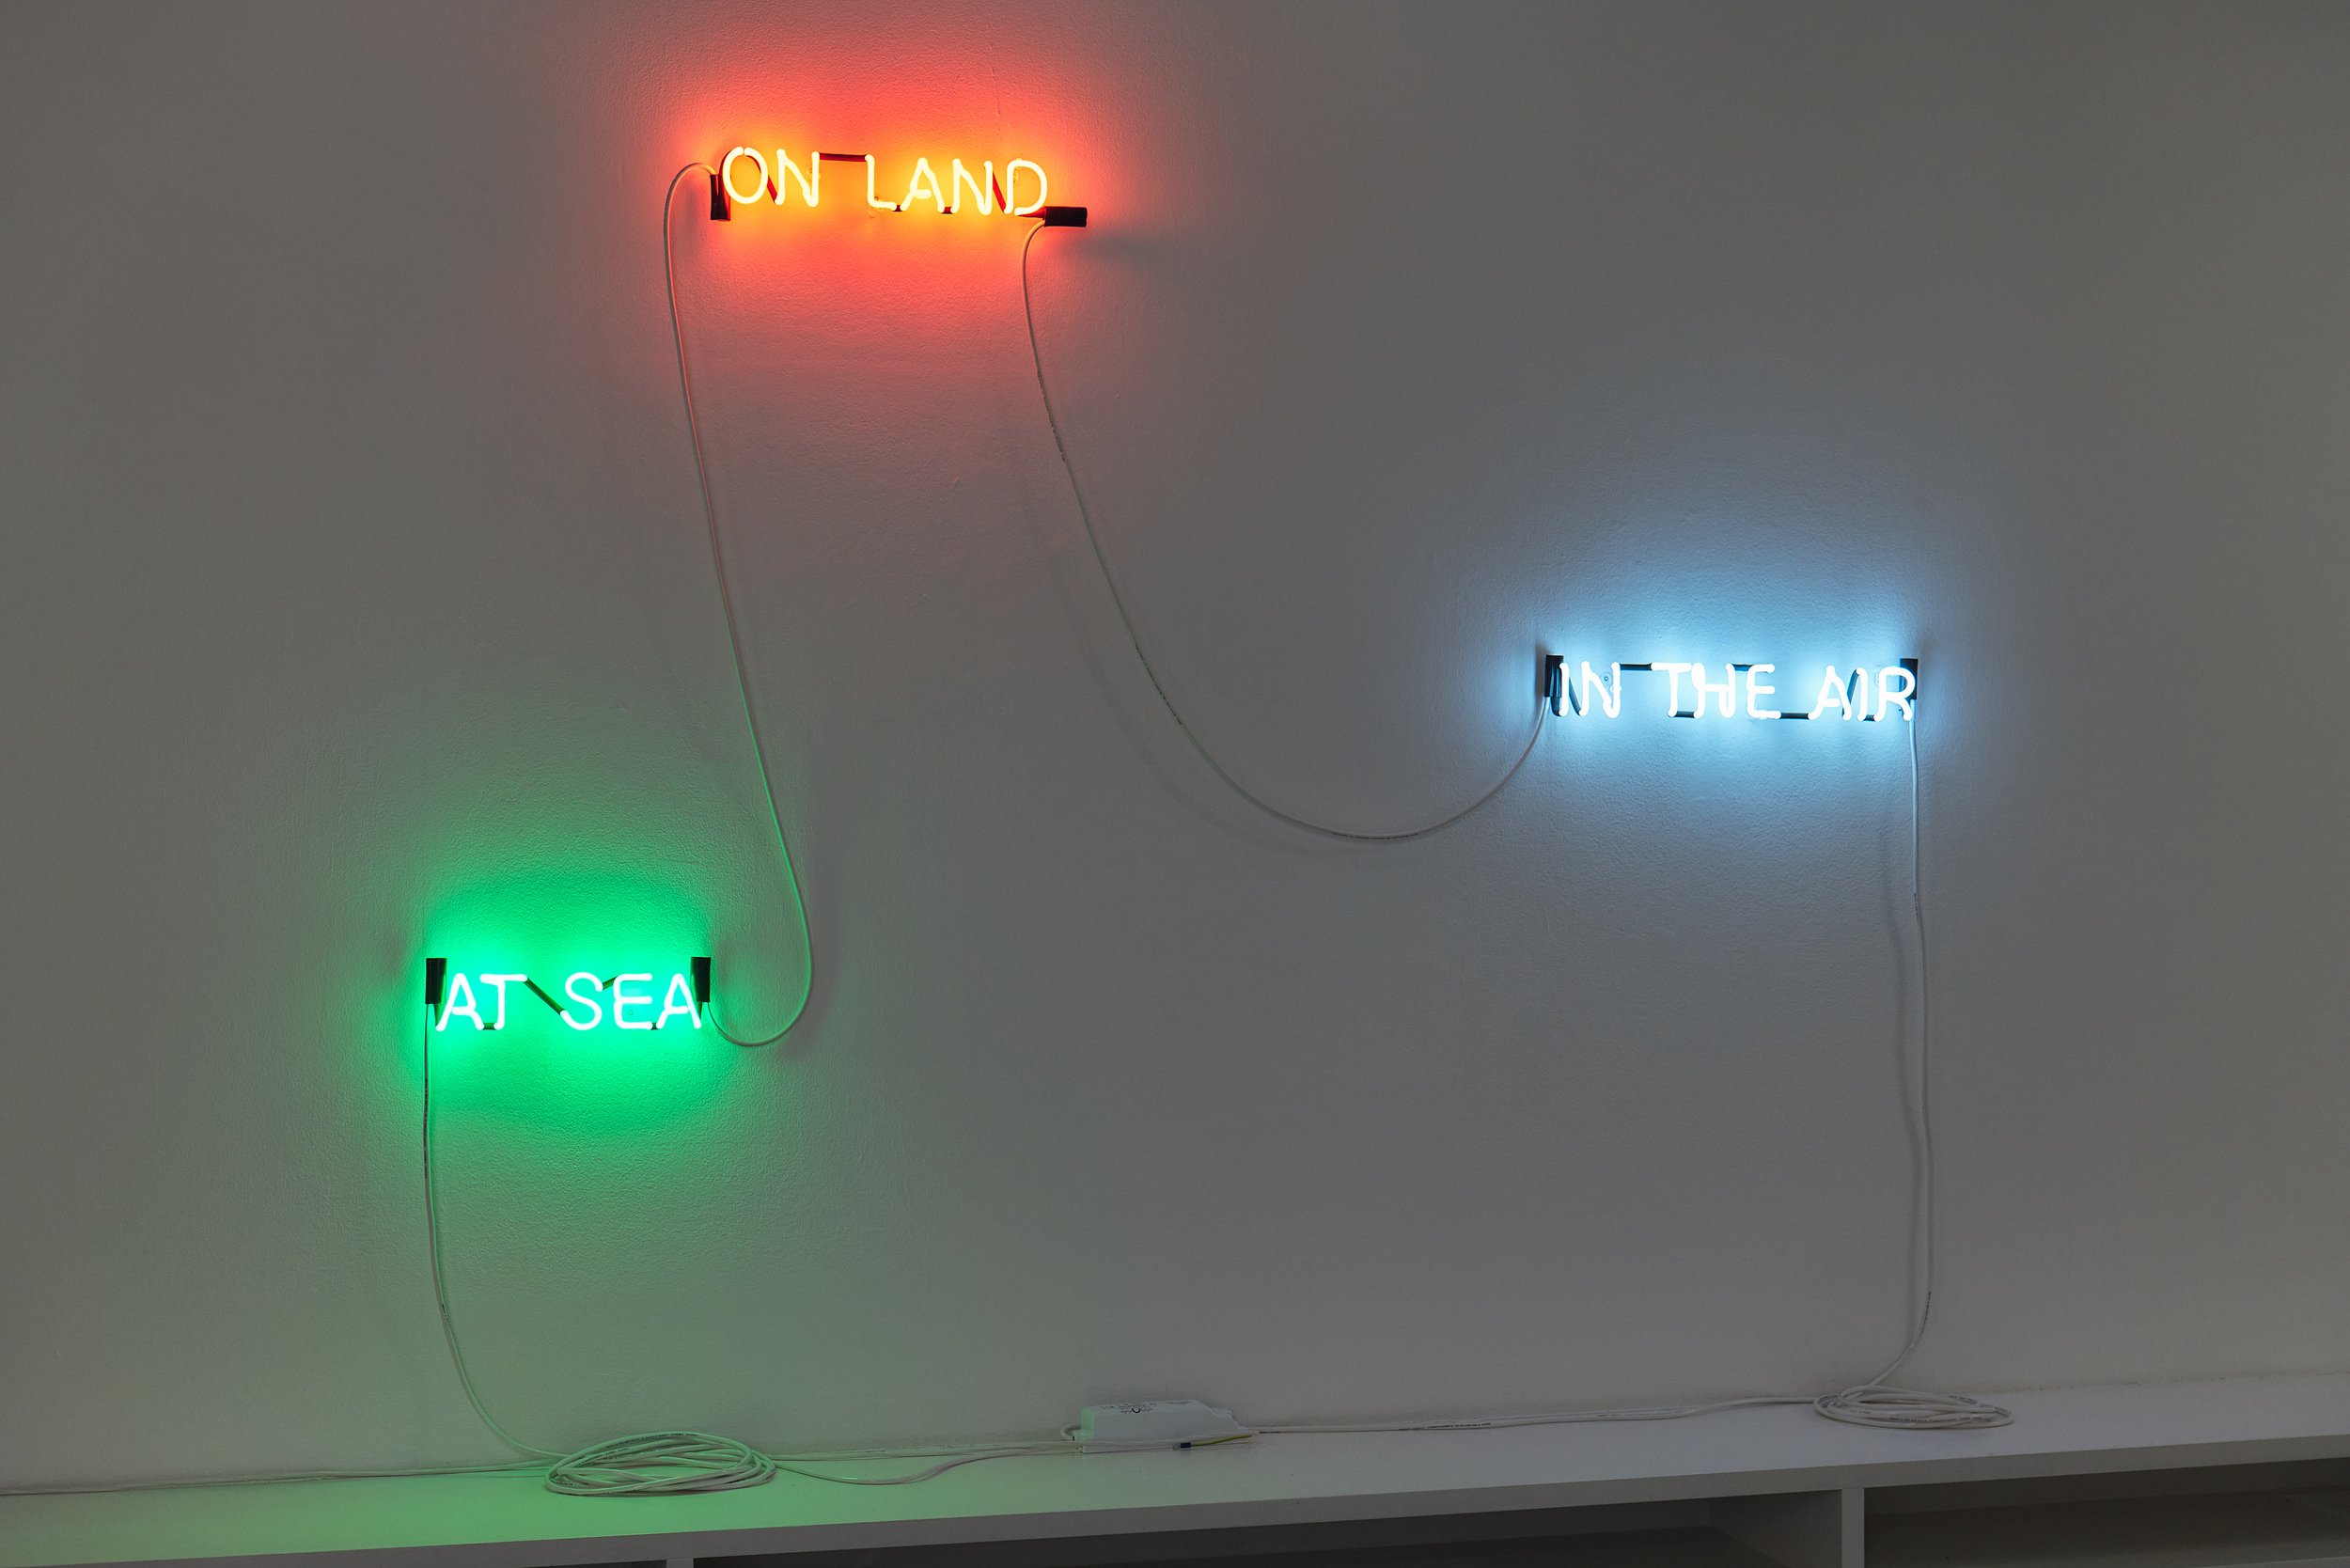   On Land, at Sea, in the Air (Defend Poetry) , 2021  Neón / Neon  6.5 x 38.5 cm; 6.5 x 48 cm; 6.5 x 30 cm 